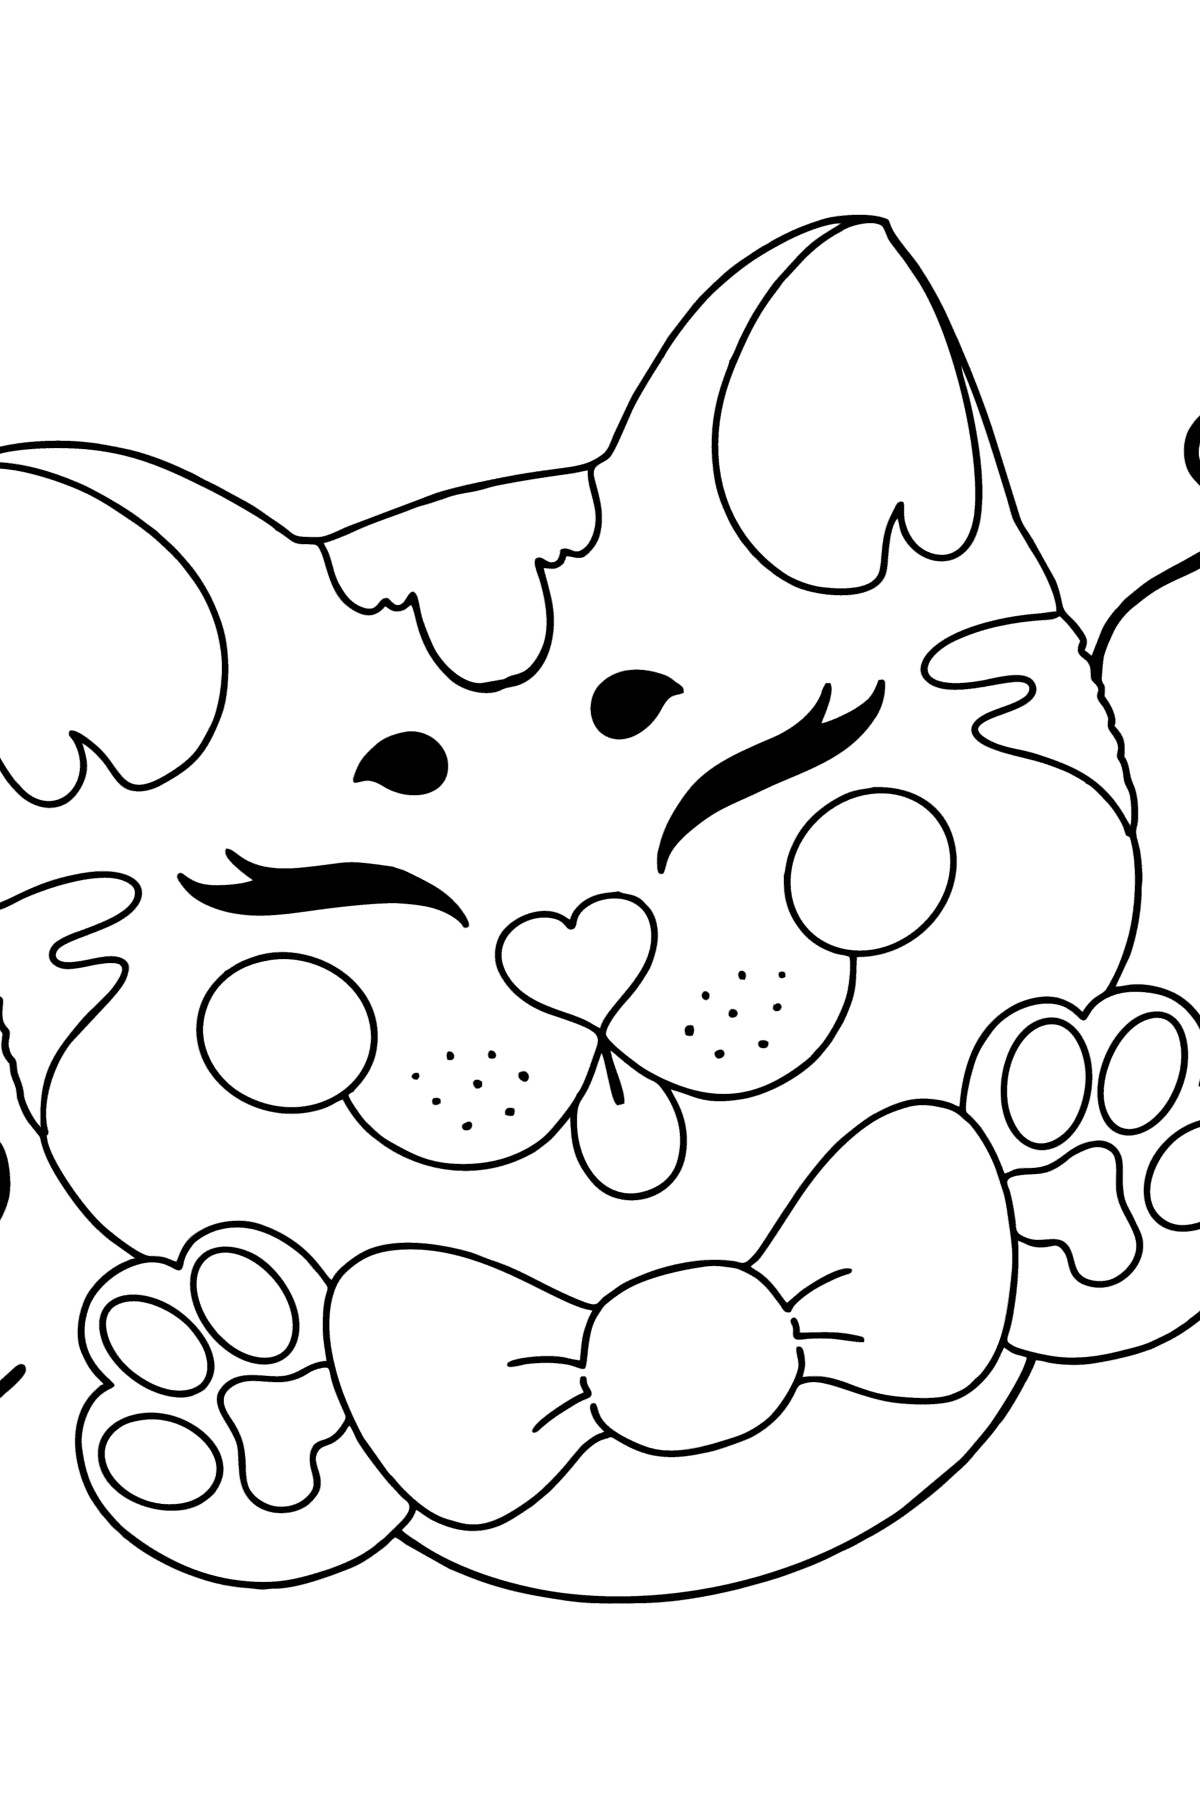 Coloring Pages For Kids   Printable for Free, and Color Online